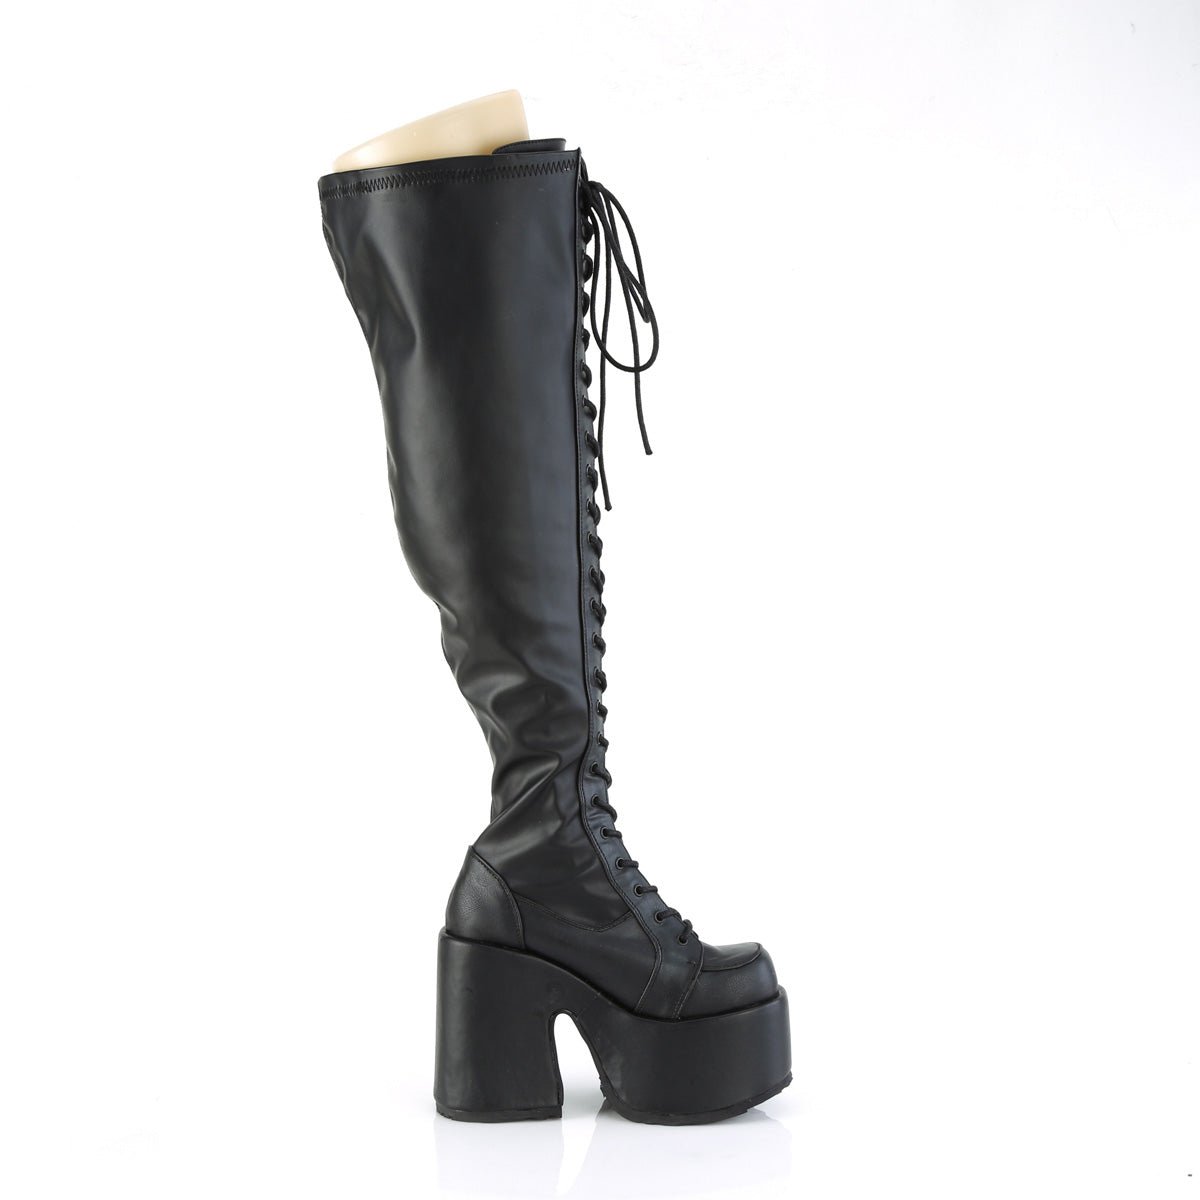 Too Fast | Demonia Camel 300 Wc | Black Stretch Vegan Leather Women's Over The Knee Boots